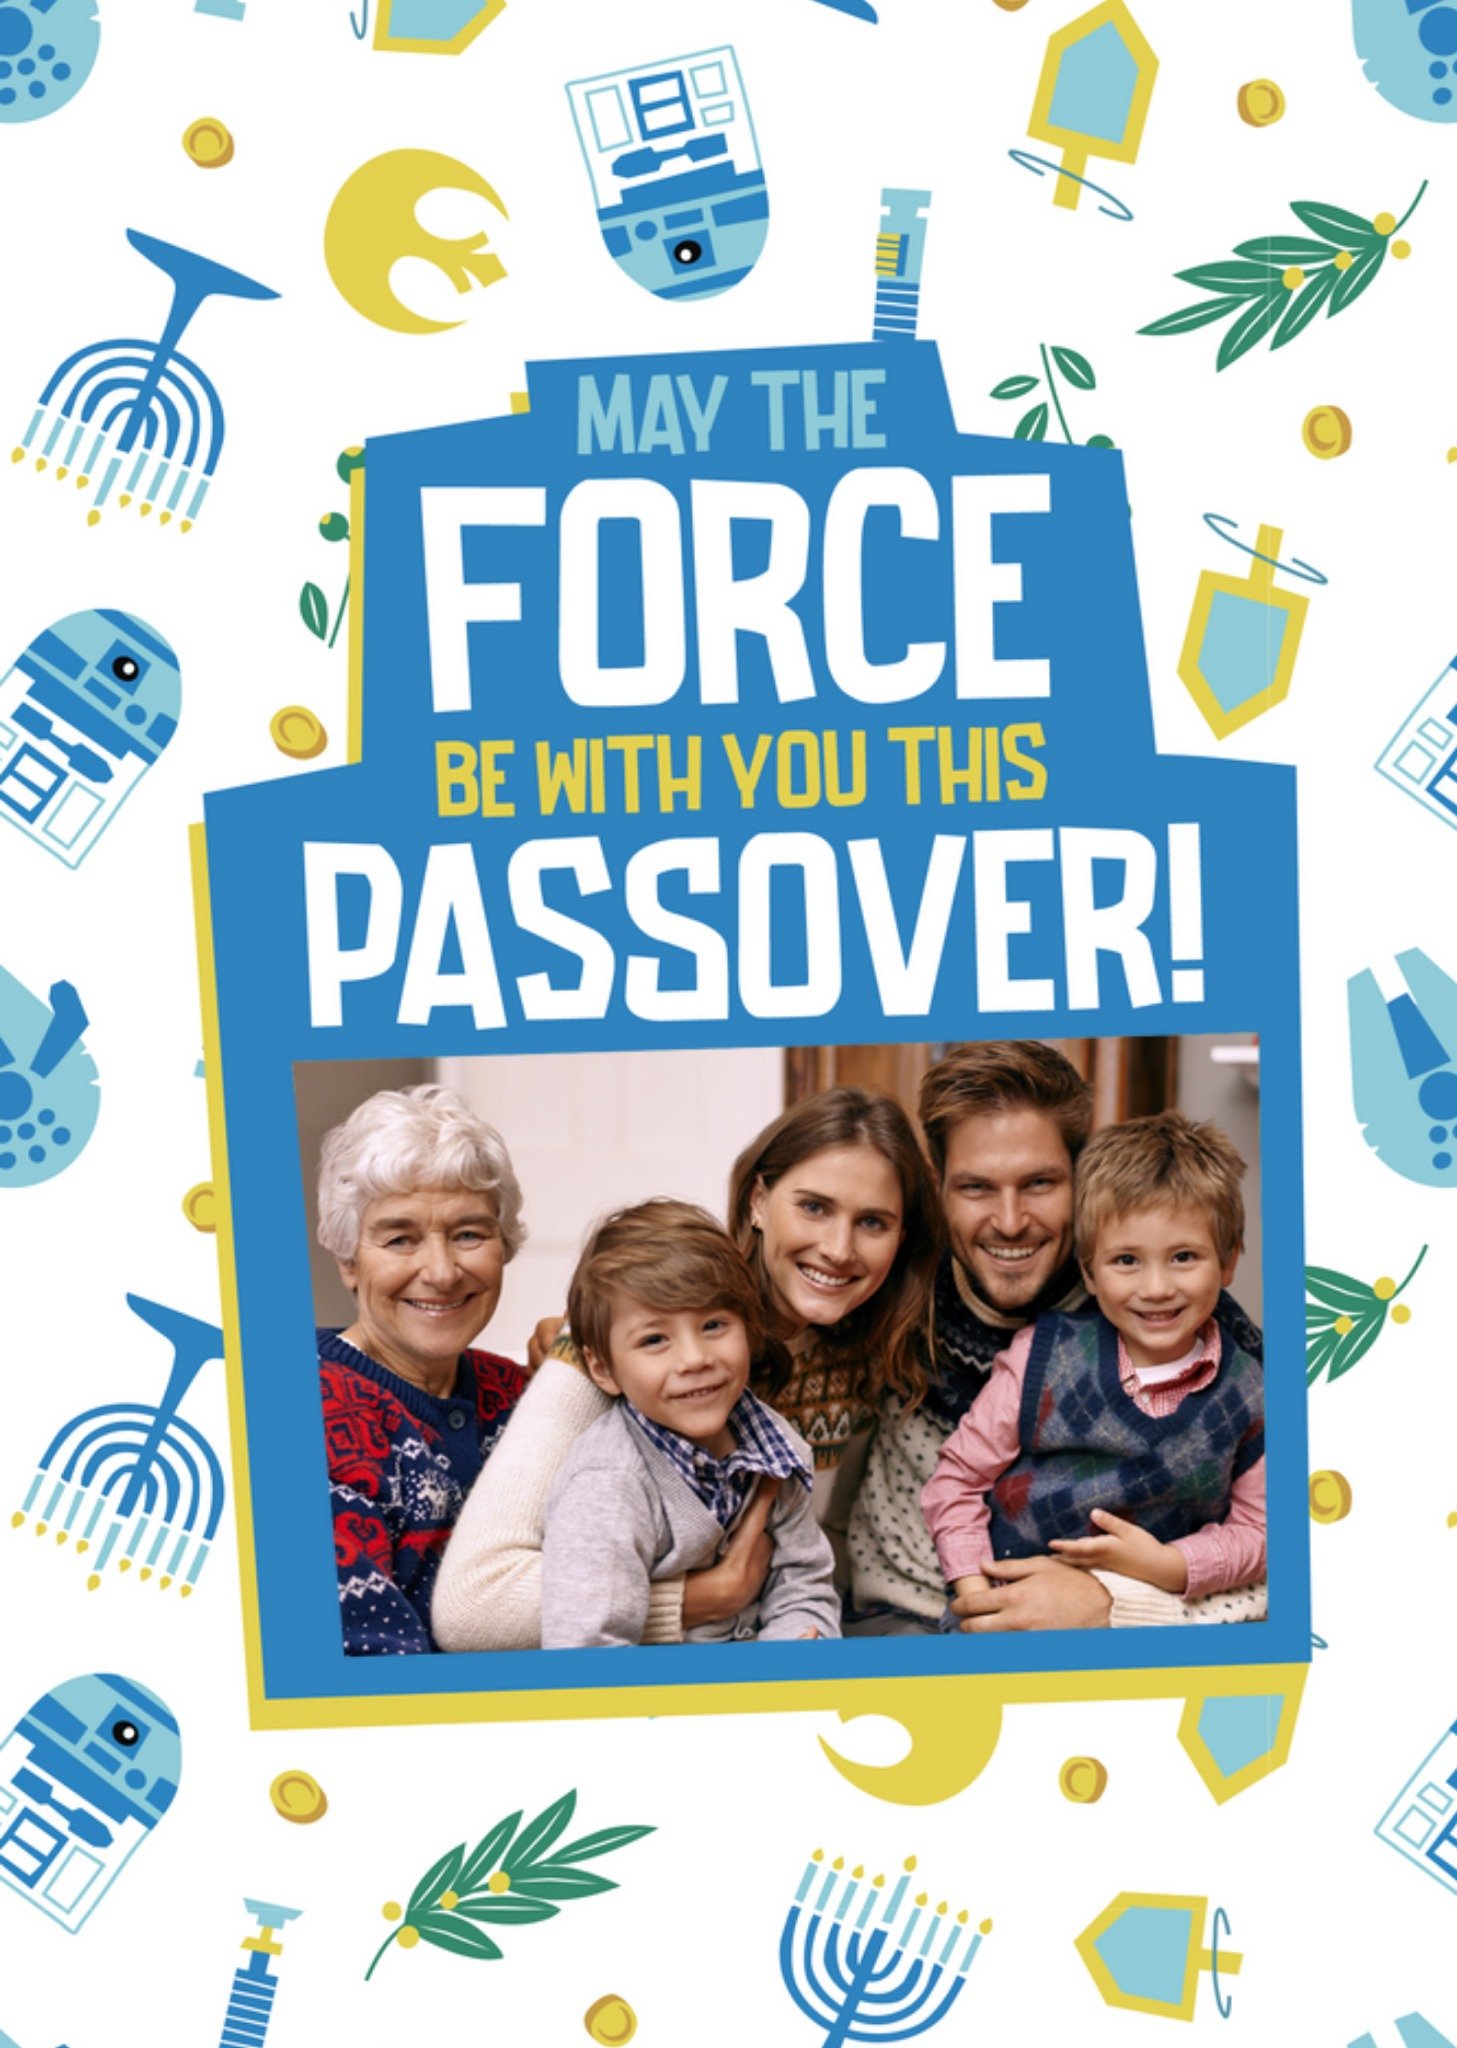 Disney Star Wars May The Force Be With You This Passover Photo Upload Passover Card, Large